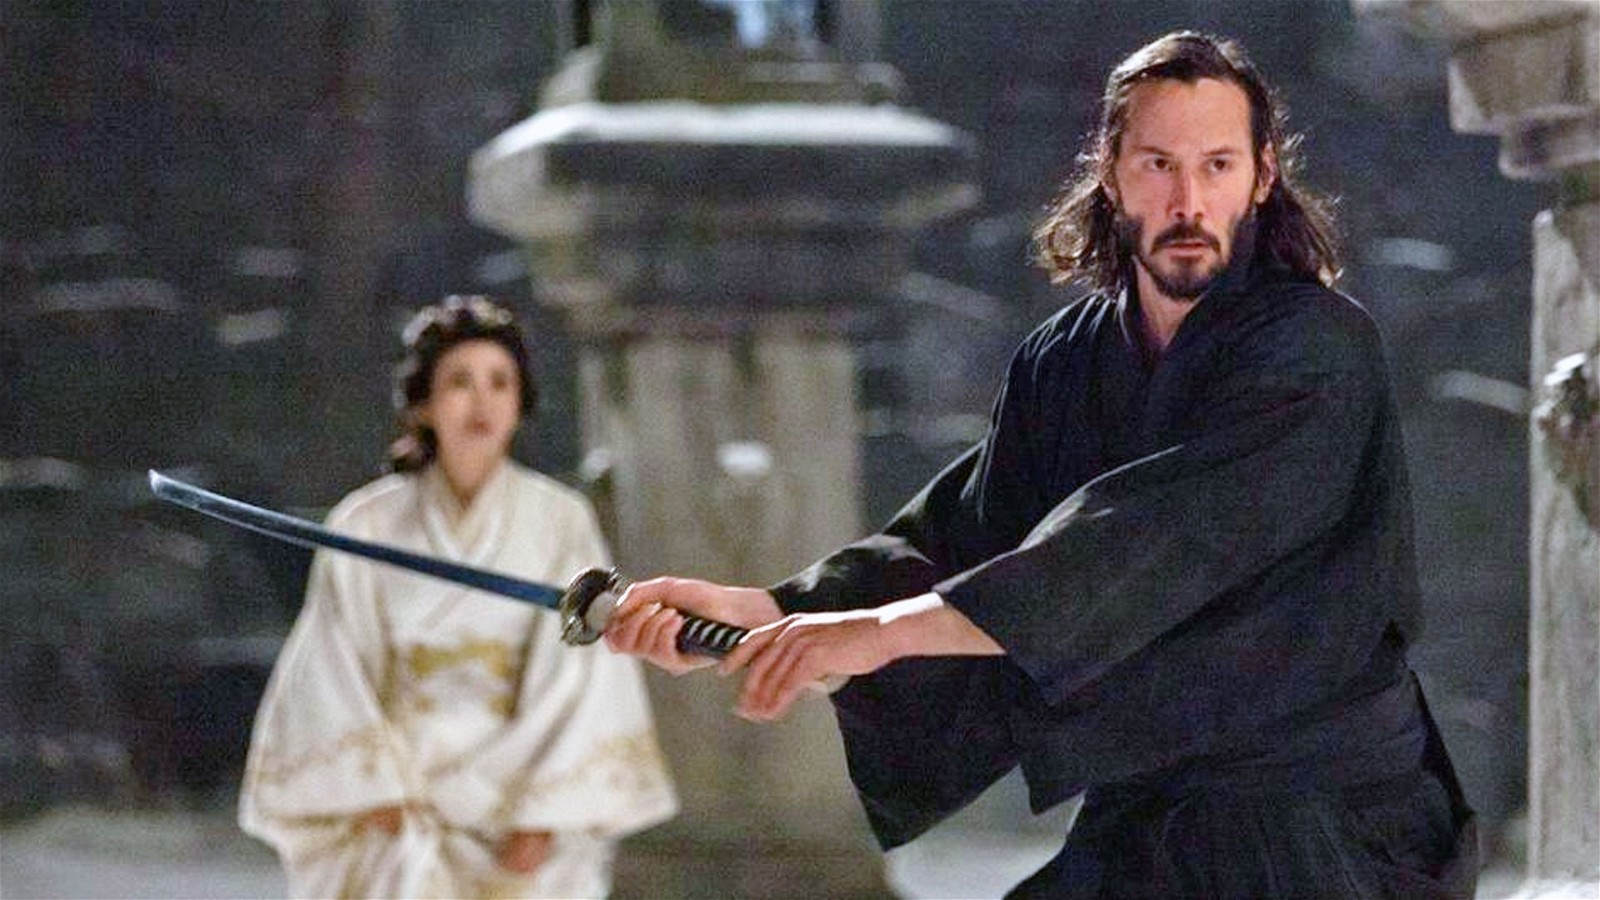 Keanu Reeves in a still from the film 47 Ronin